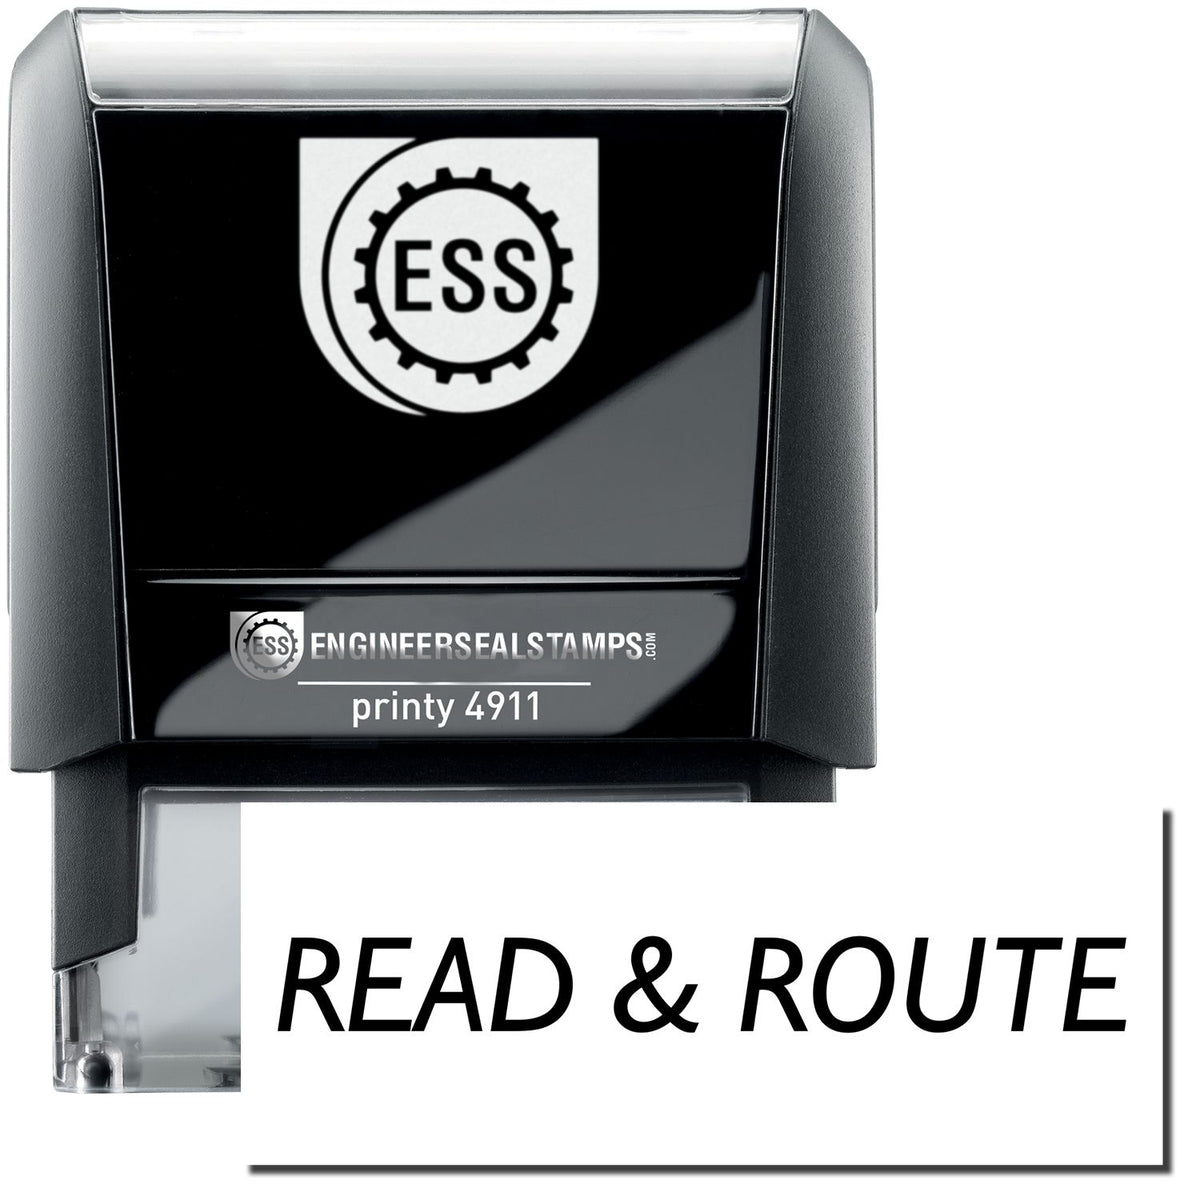 A self-inking stamp with a stamped image showing how the text &quot;READ &amp; ROUTE&quot; is displayed after stamping.